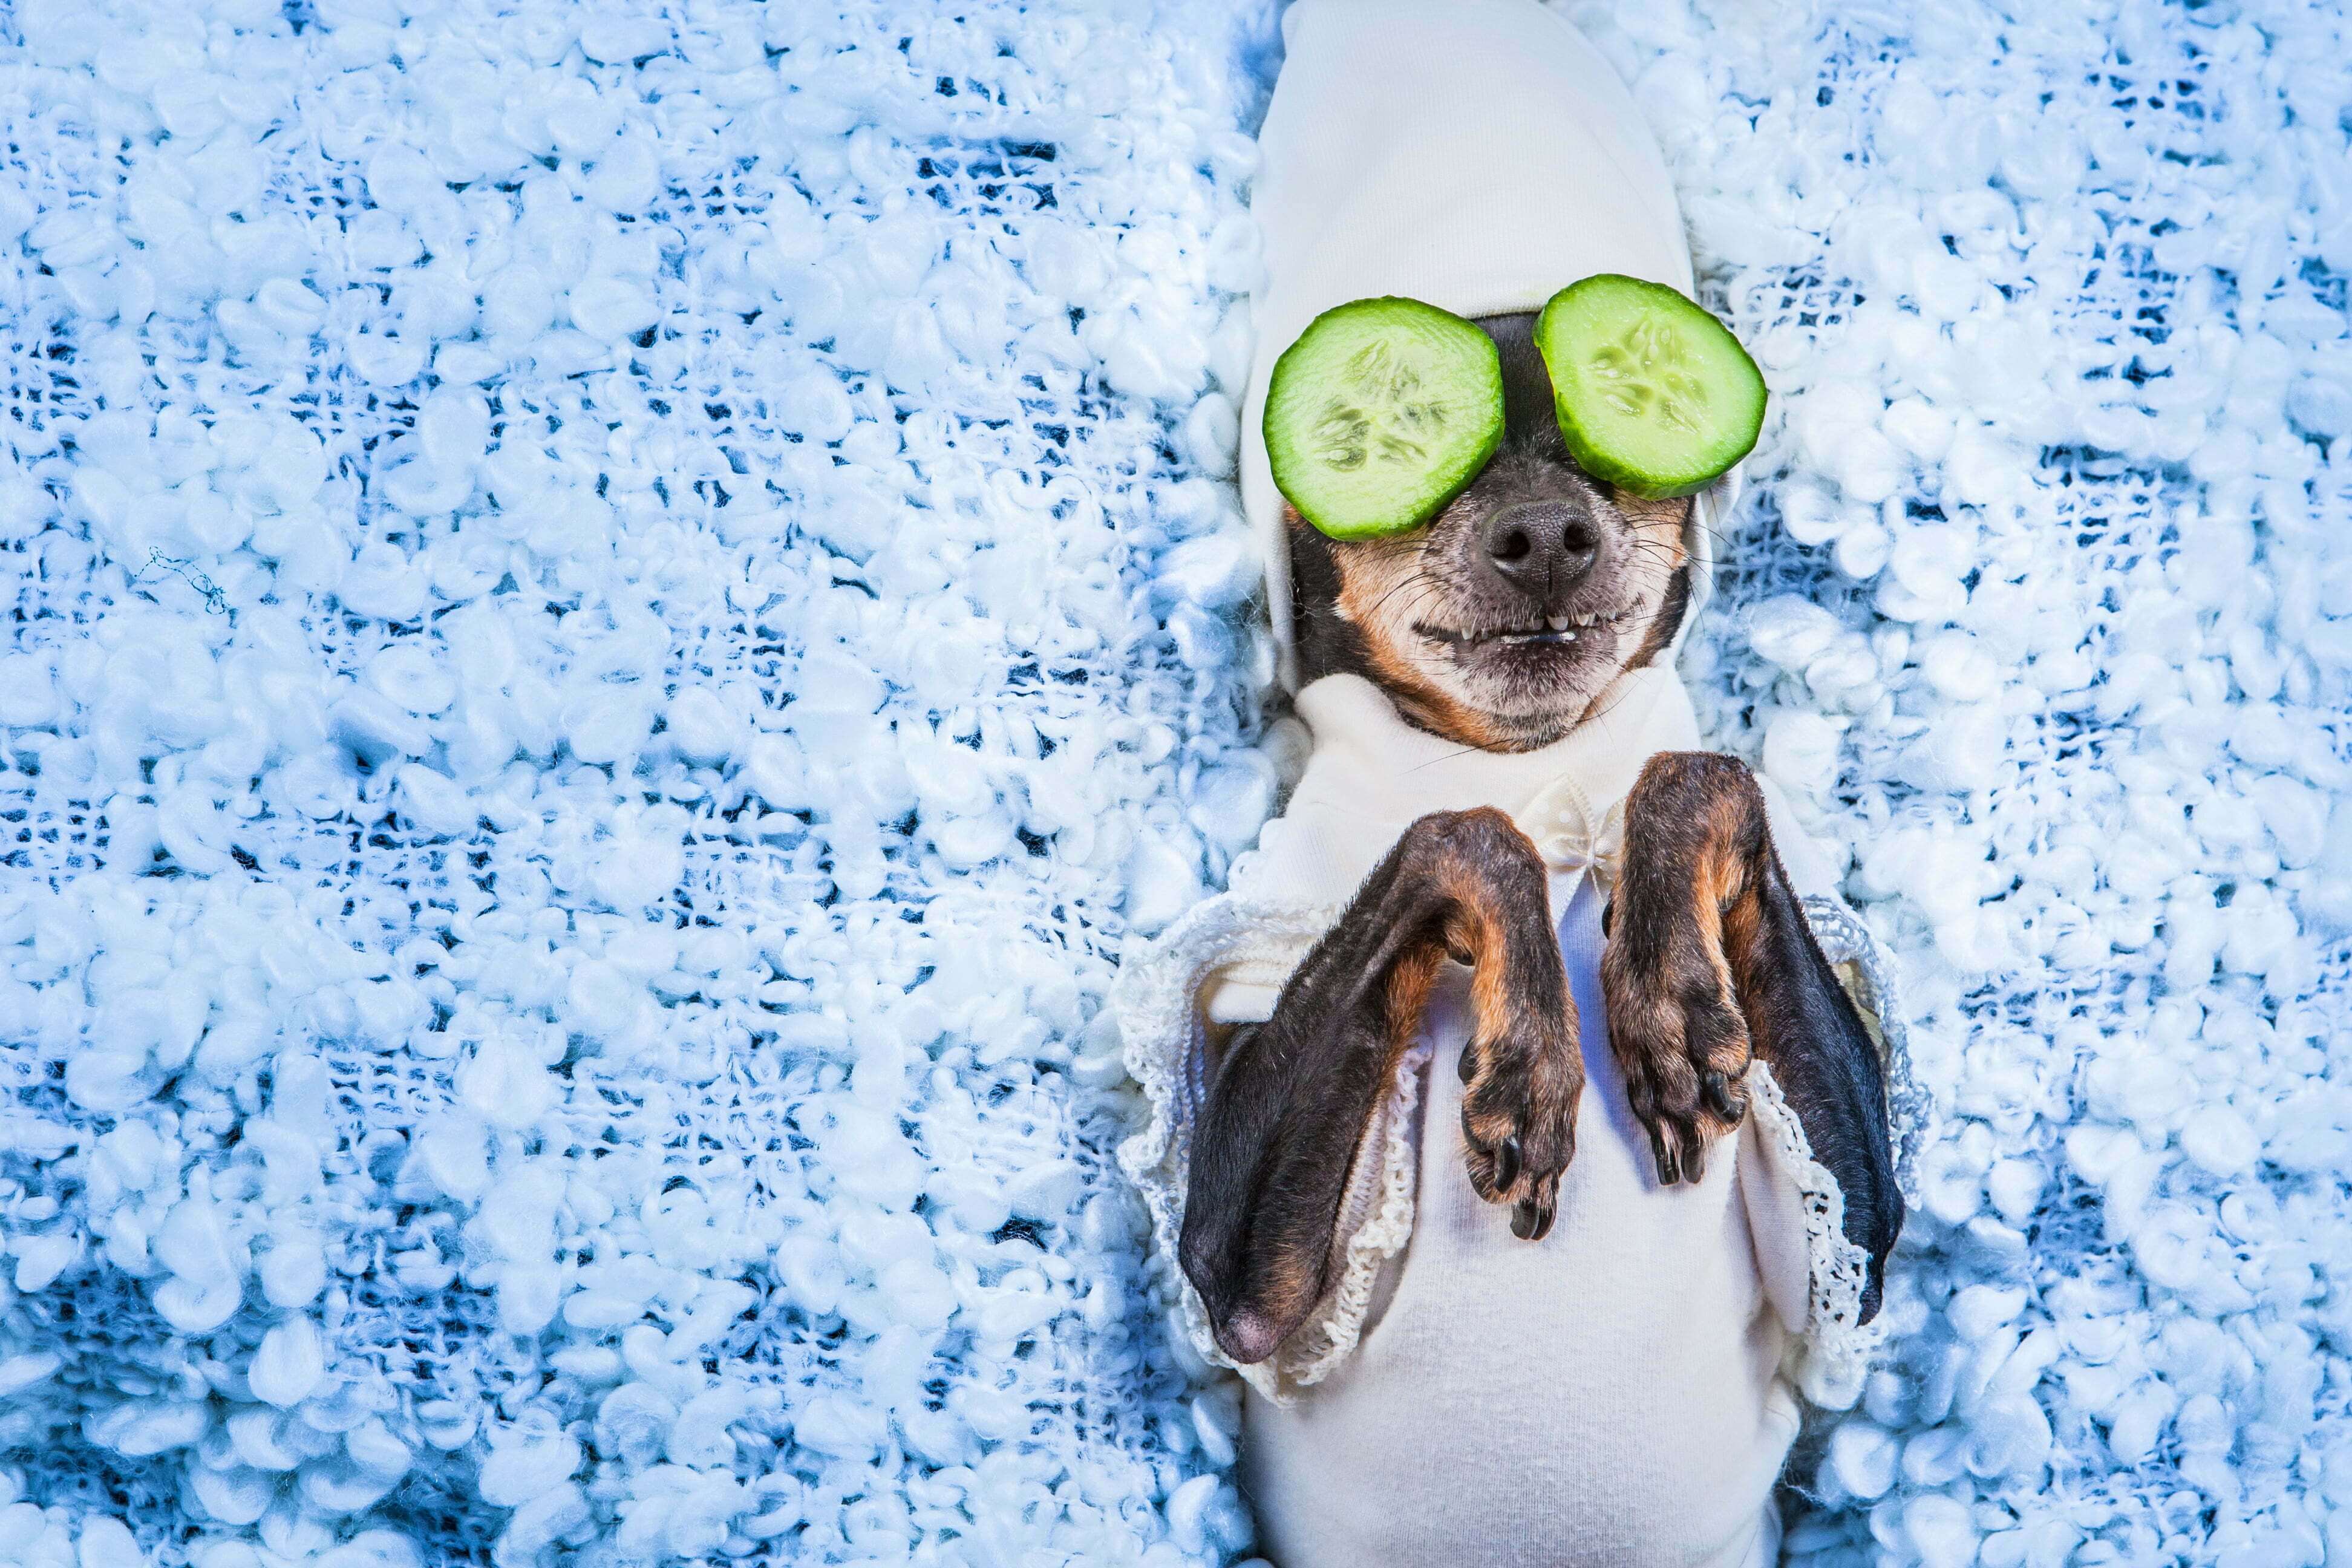 pampered pup at spa with cucumbers on eyes